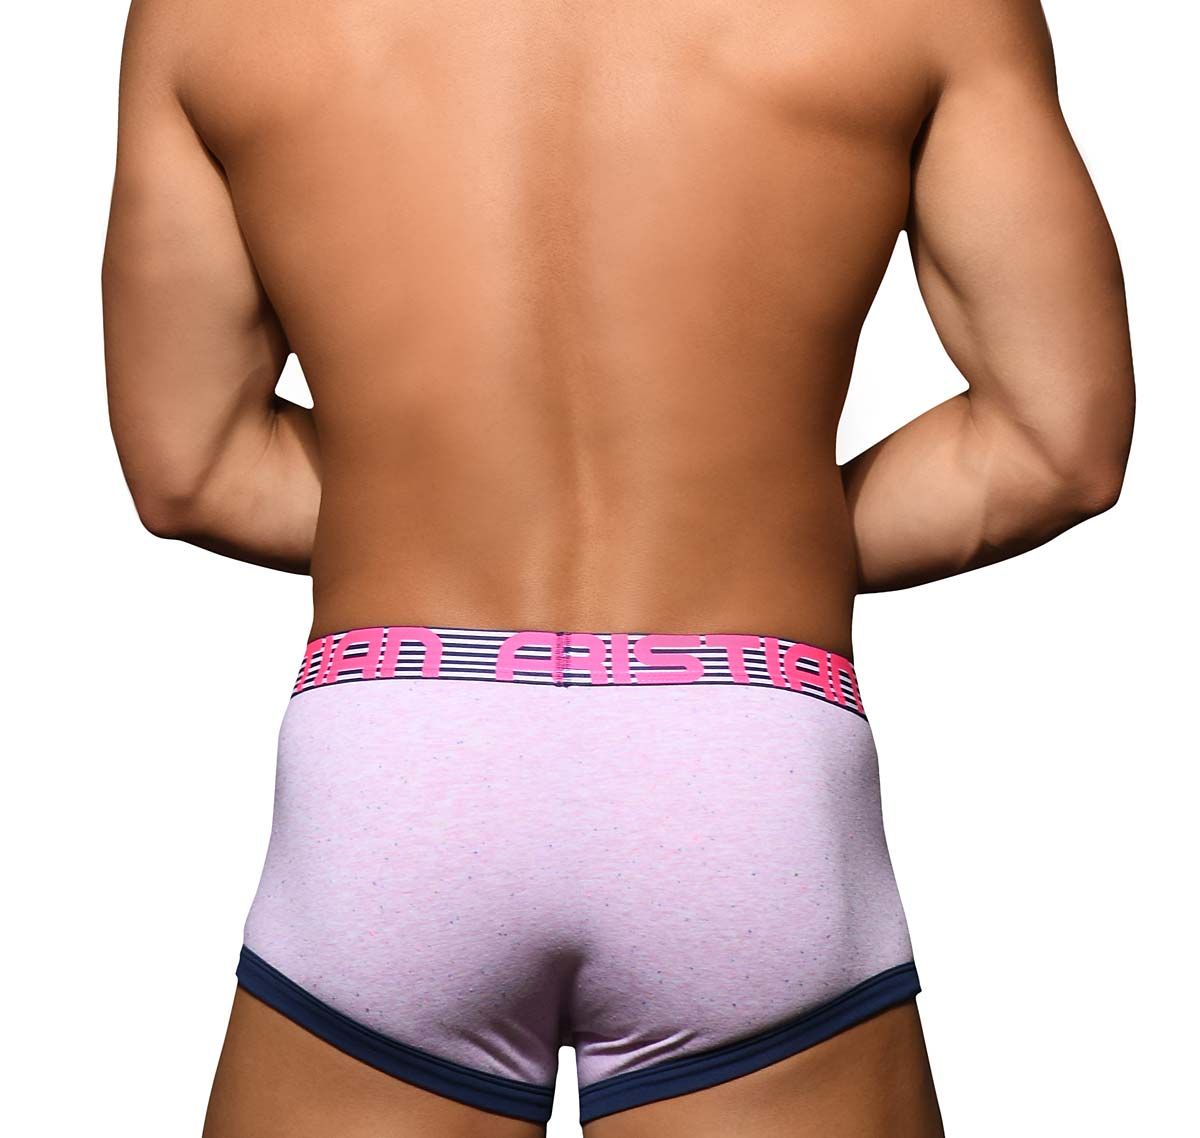 Andrew Christian Boxershorts ALMOST NAKED ELEMENT BOXER 92707, pink